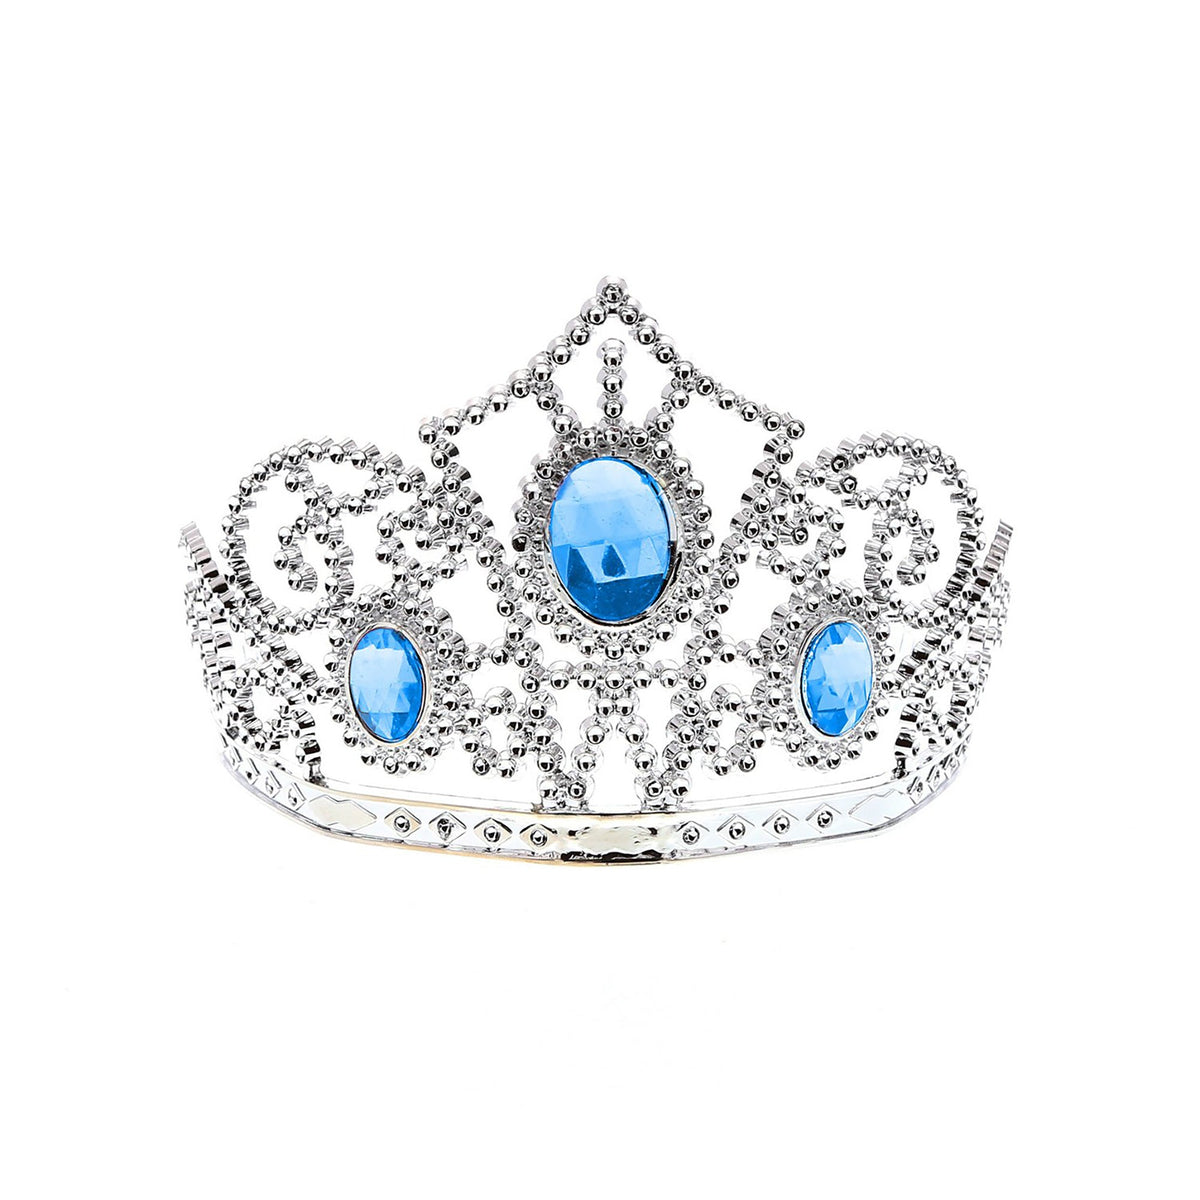 IVY TRADING INC. Costume Accessories Blue Plastic Jeweled Tiara, 1 Count 8336572000622